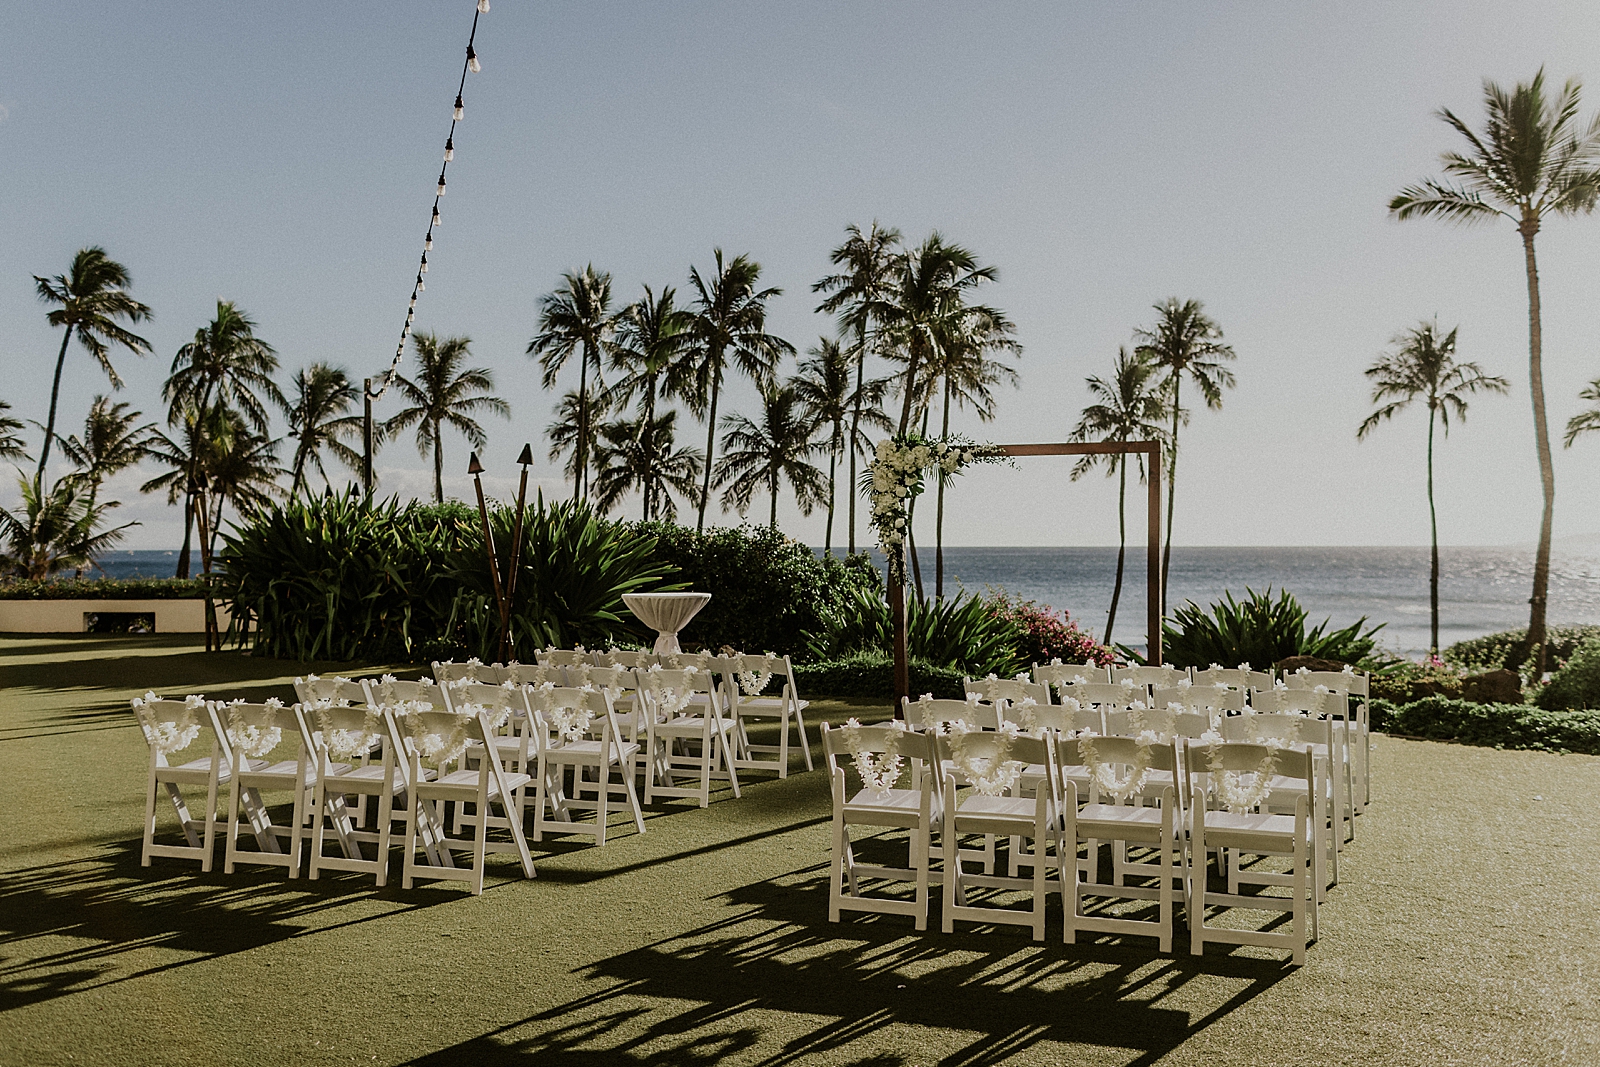 Detail shot of outdoor Ceremony area by the ocean with tall palm trees